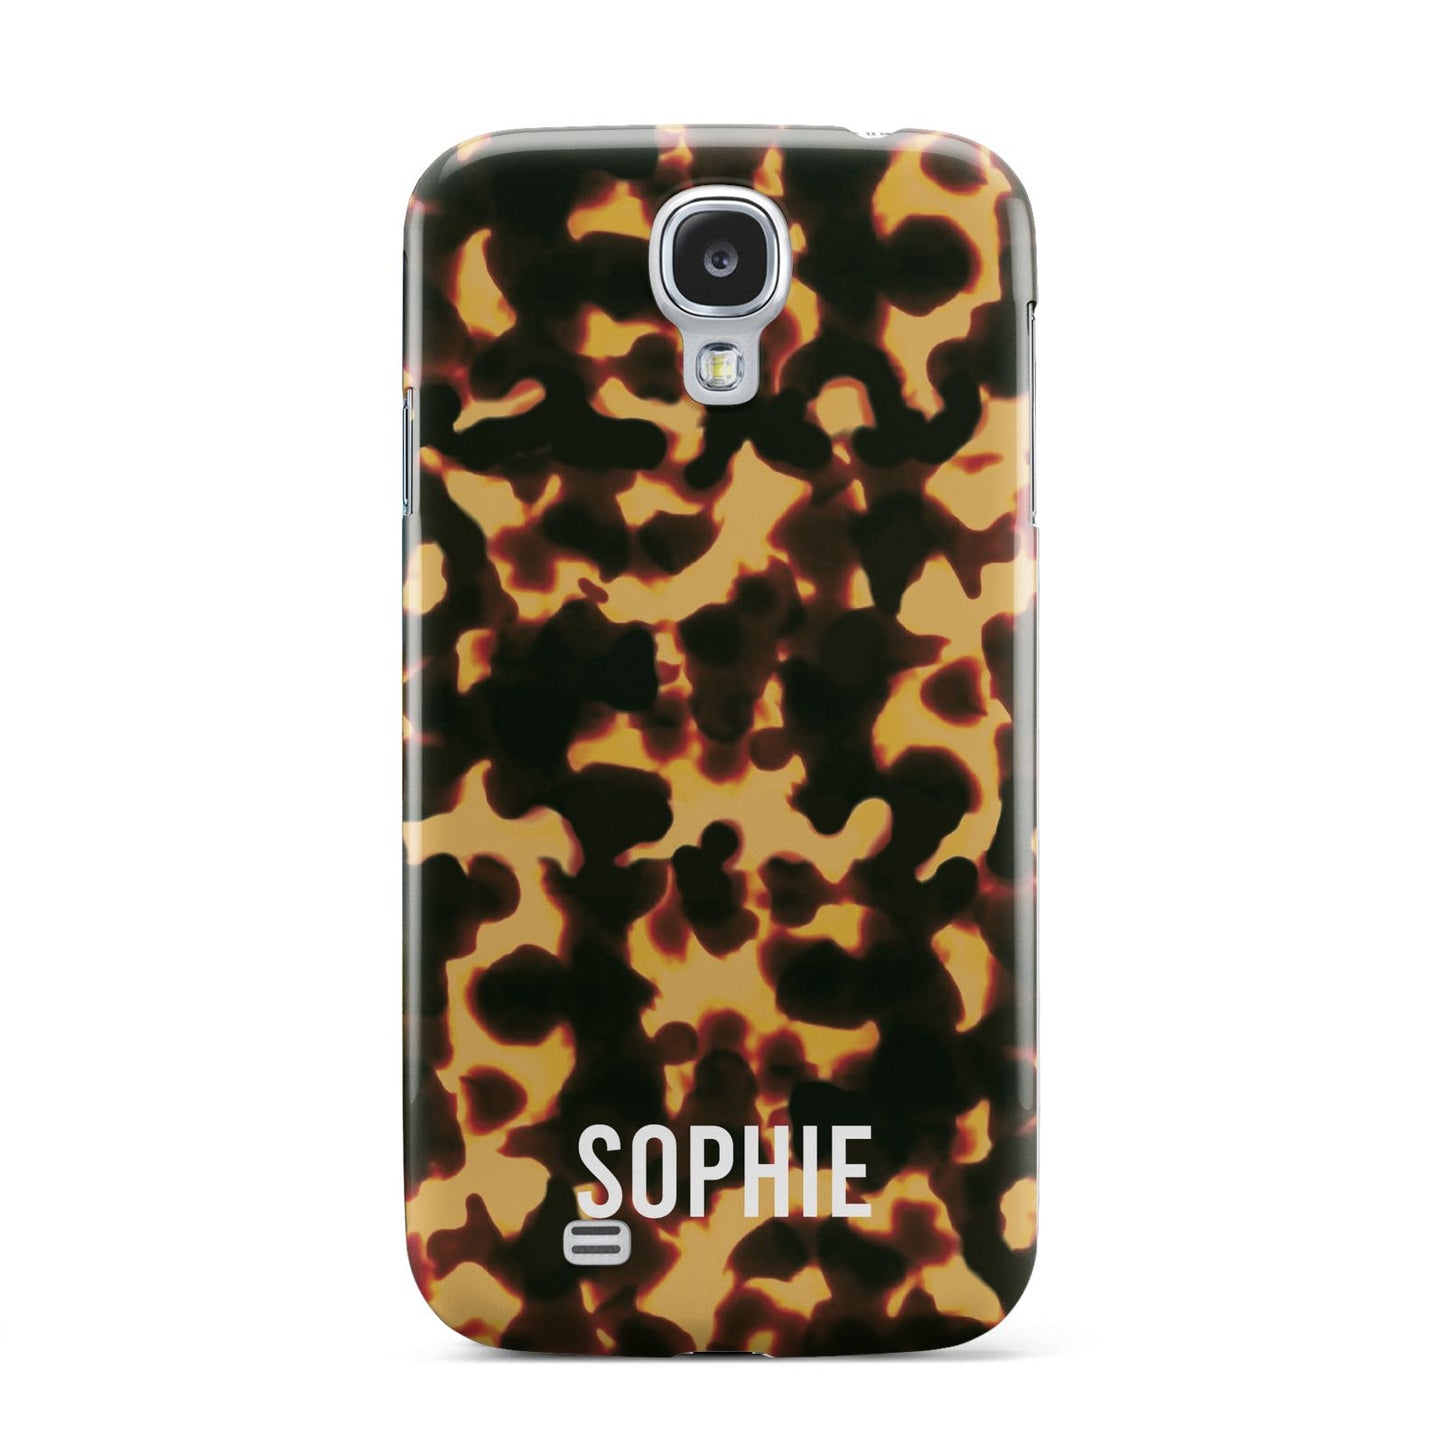 Personalised Tortoise Shell Pattern Samsung Galaxy S4 Case